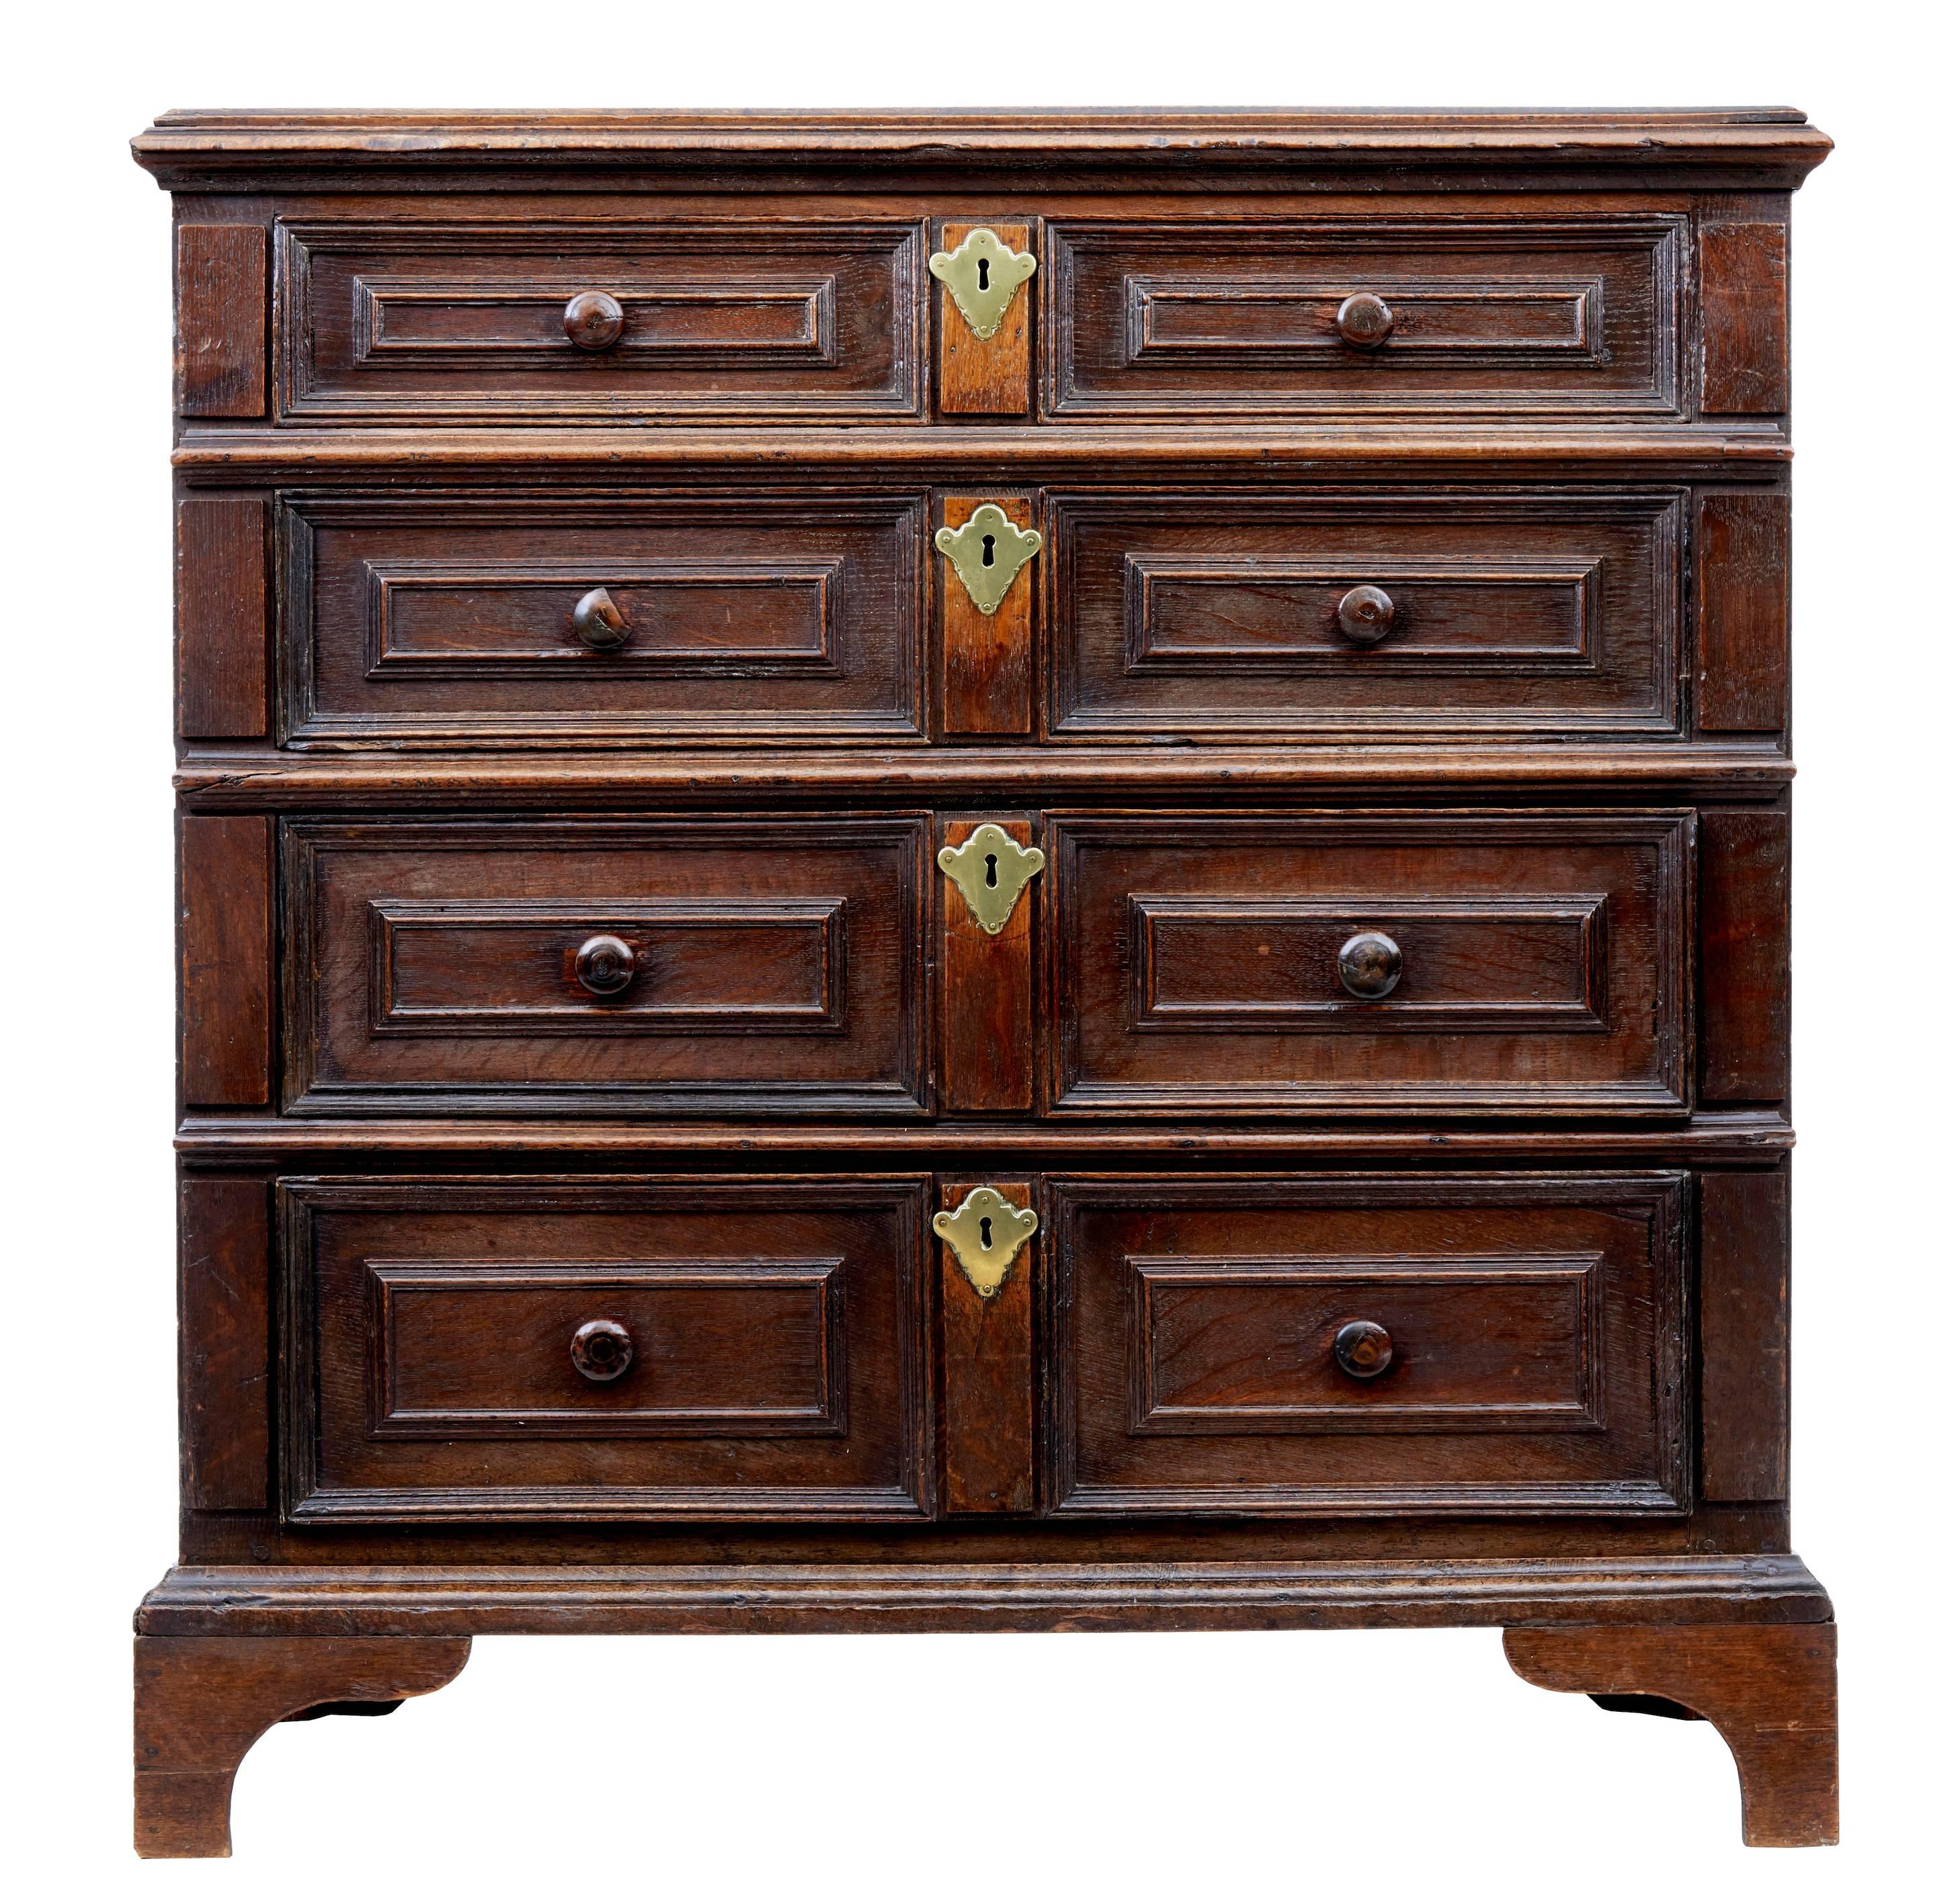 Good quality moulded front chest of drawers, circa 1700.
Four drawers with wooden knobs with brass escutheon plates.
Standing on bracket feet.
Surface marks to top surface (photographed)

Measures: Height 40